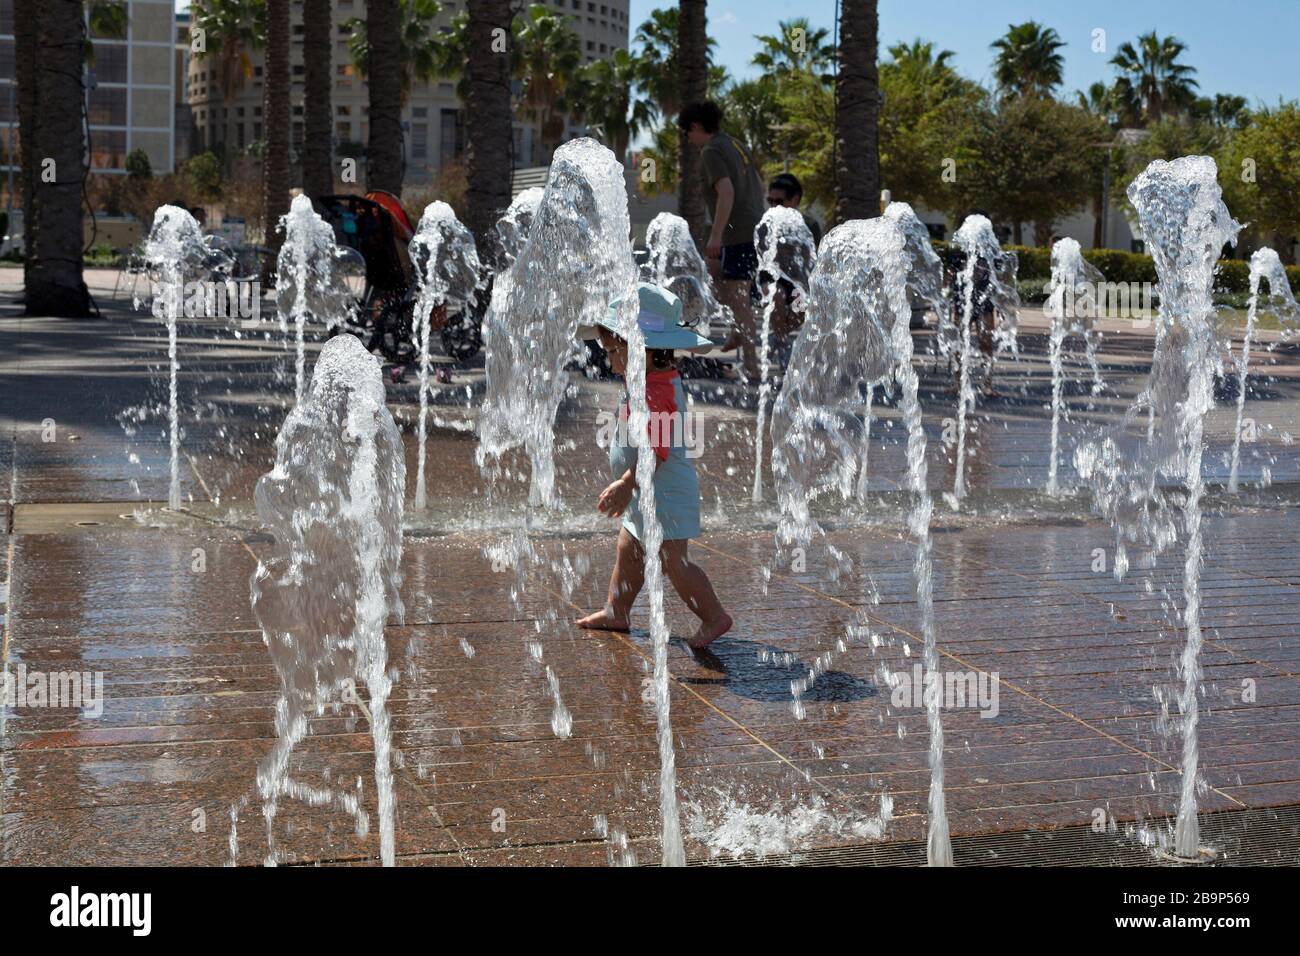 Water play is enjoyed by families at Curtis Hixon Waterfront Park in Tampa, Florida, USA. Stock Photo